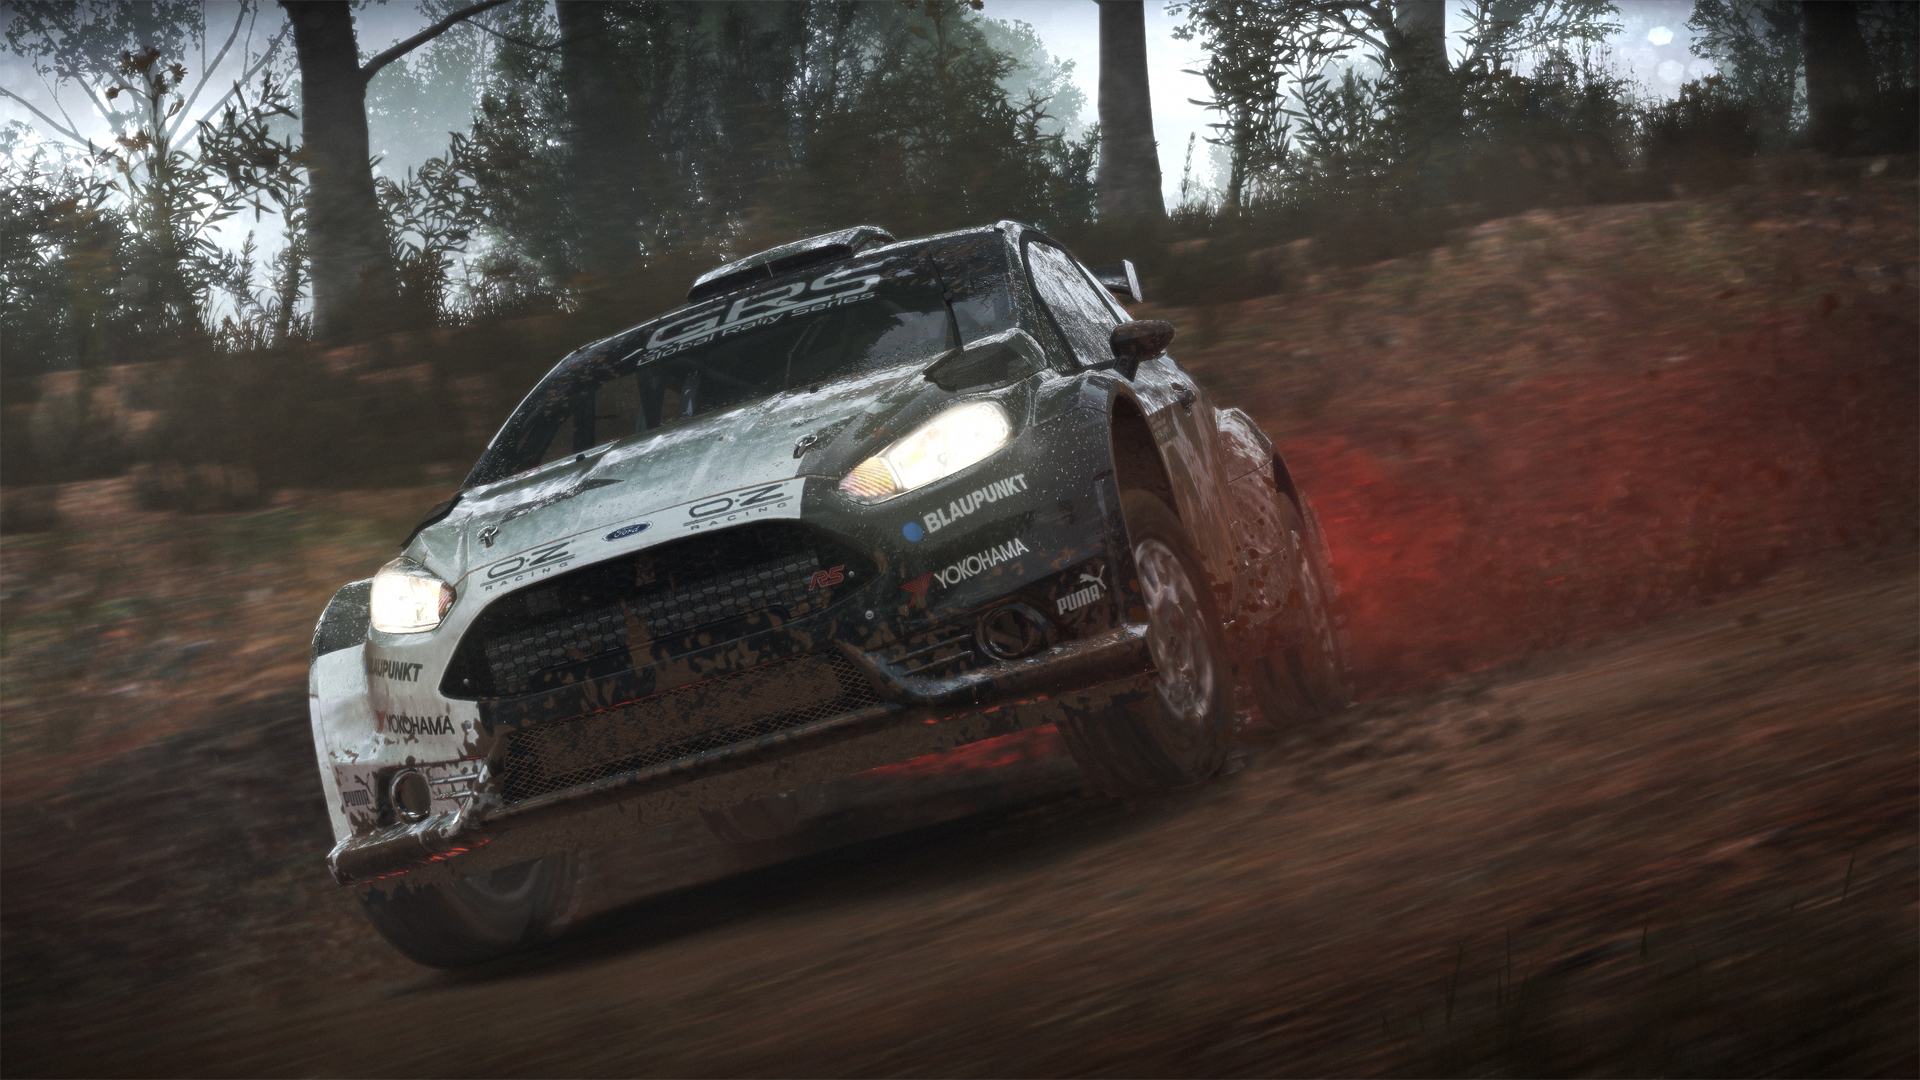 Video Game Dirt 4 HD Wallpaper | Background Image